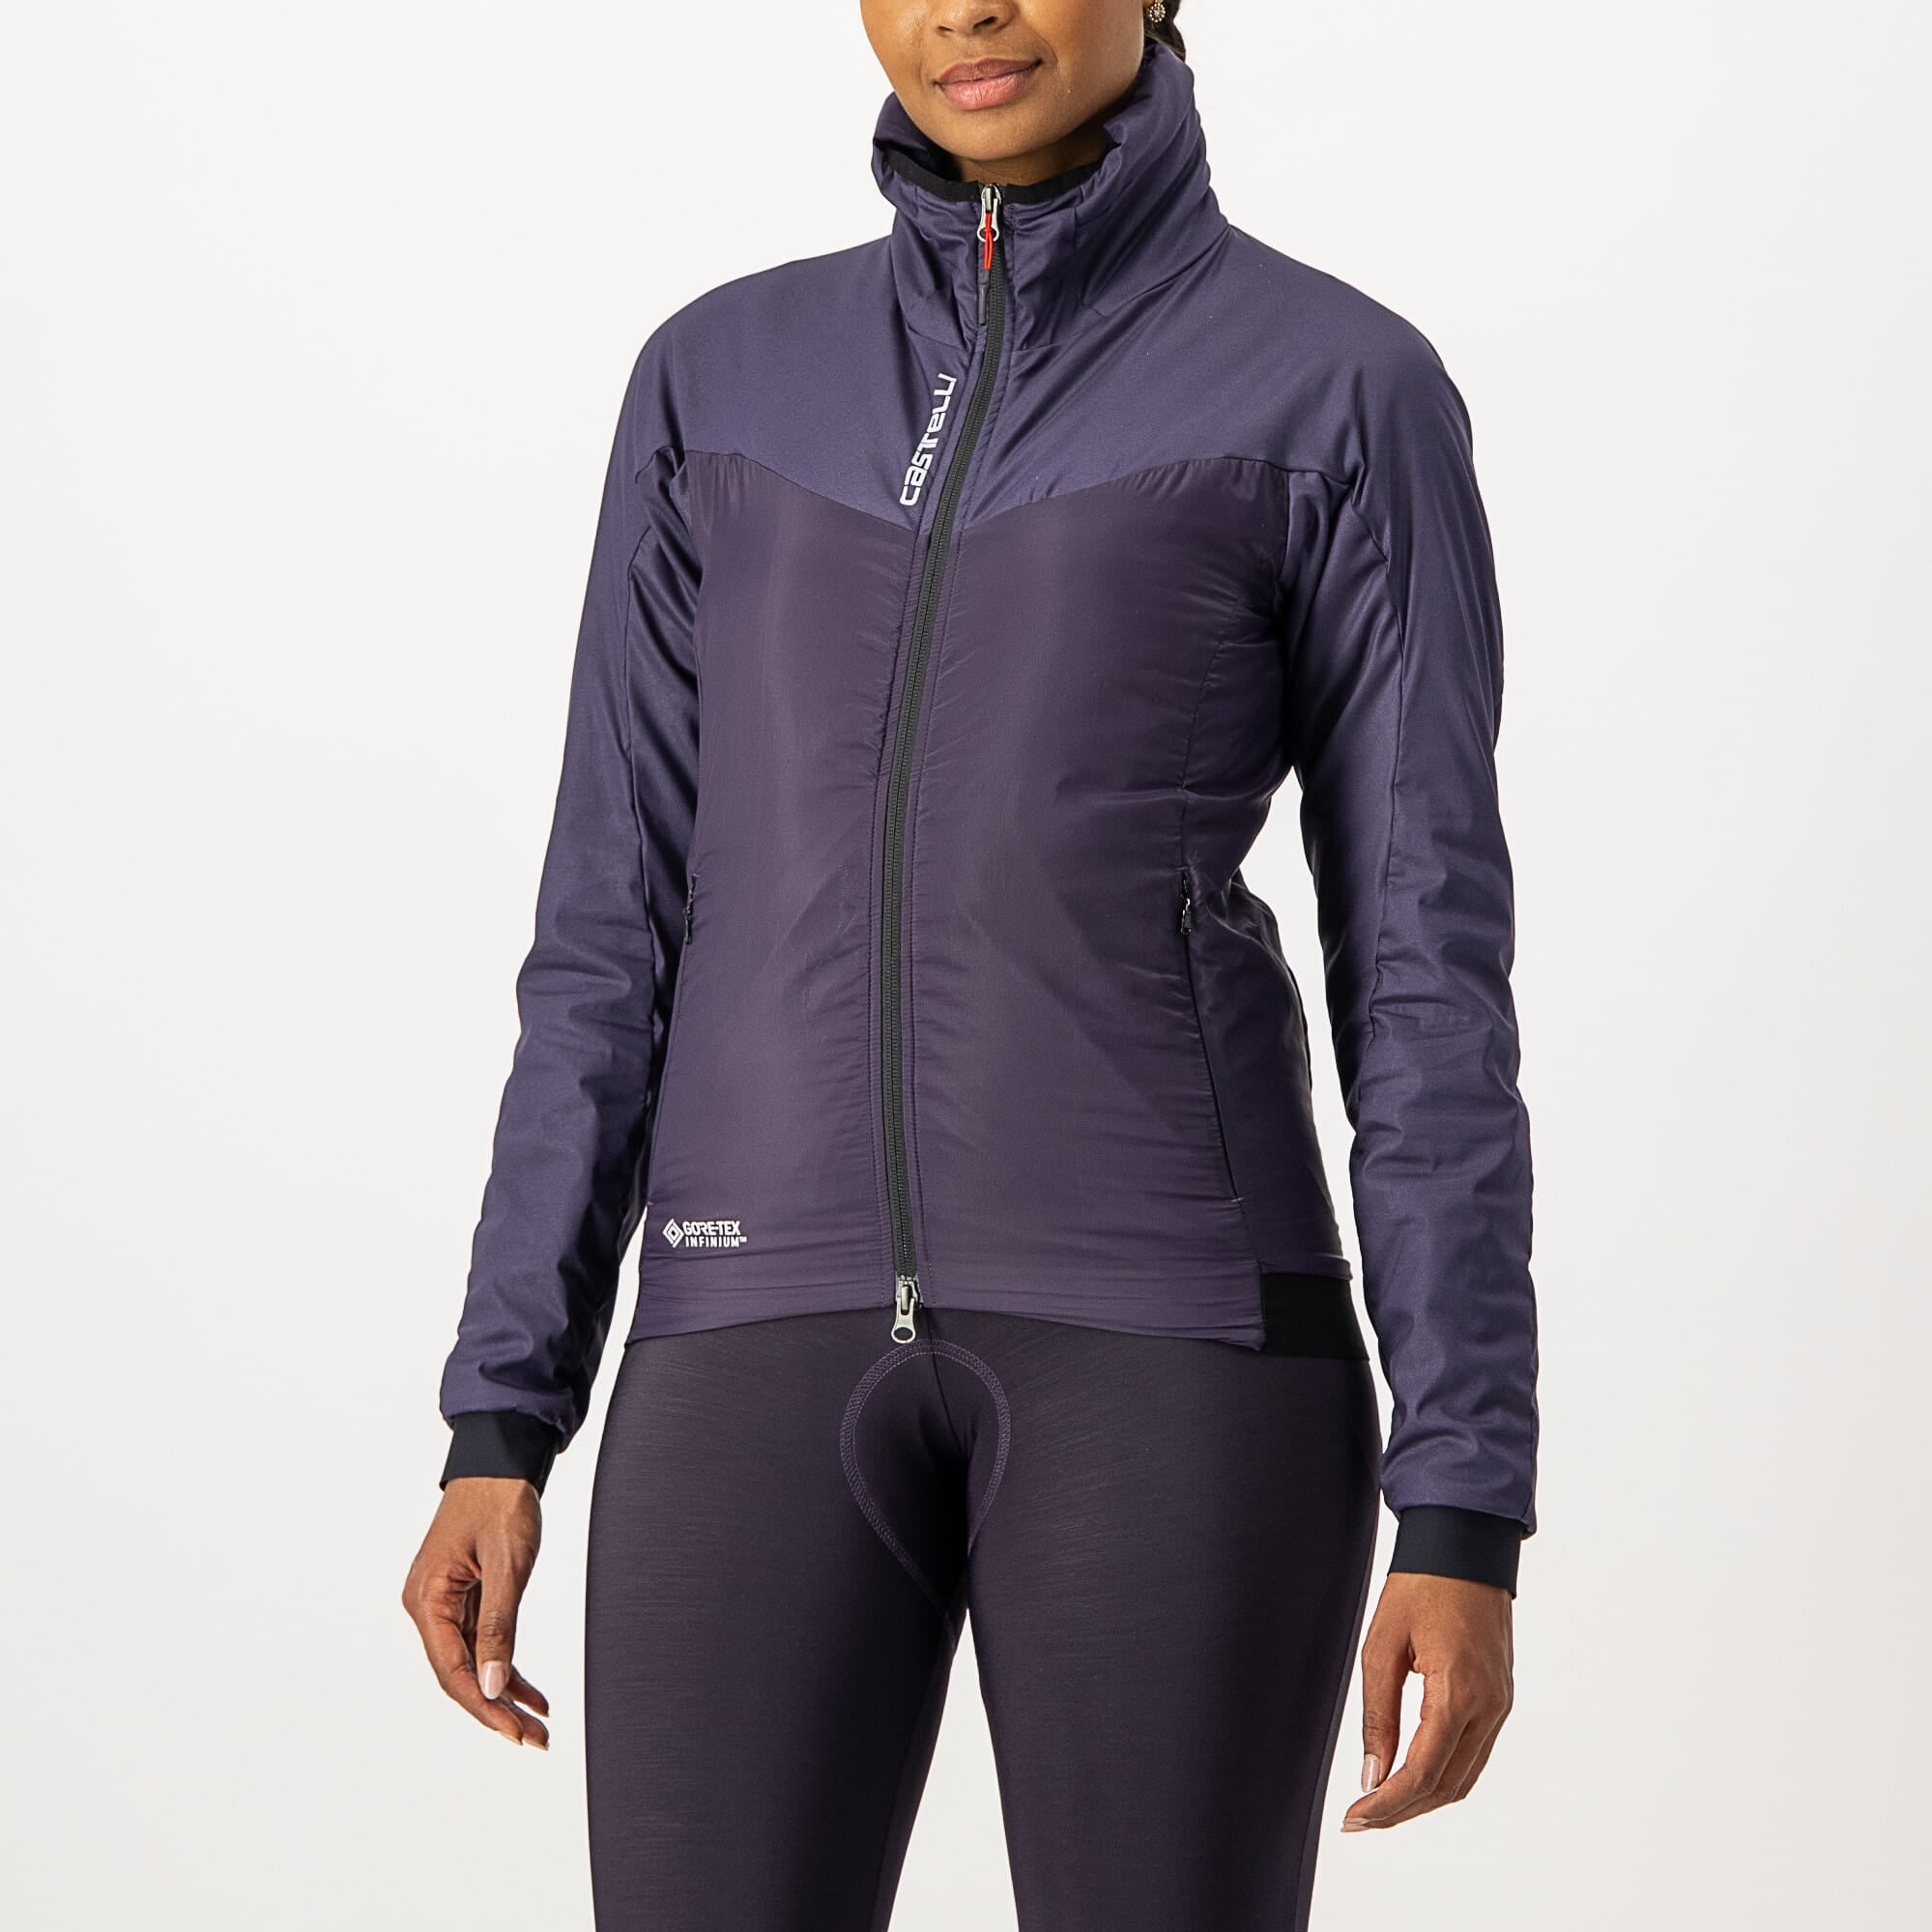 Fly Thermal Women's Jacket